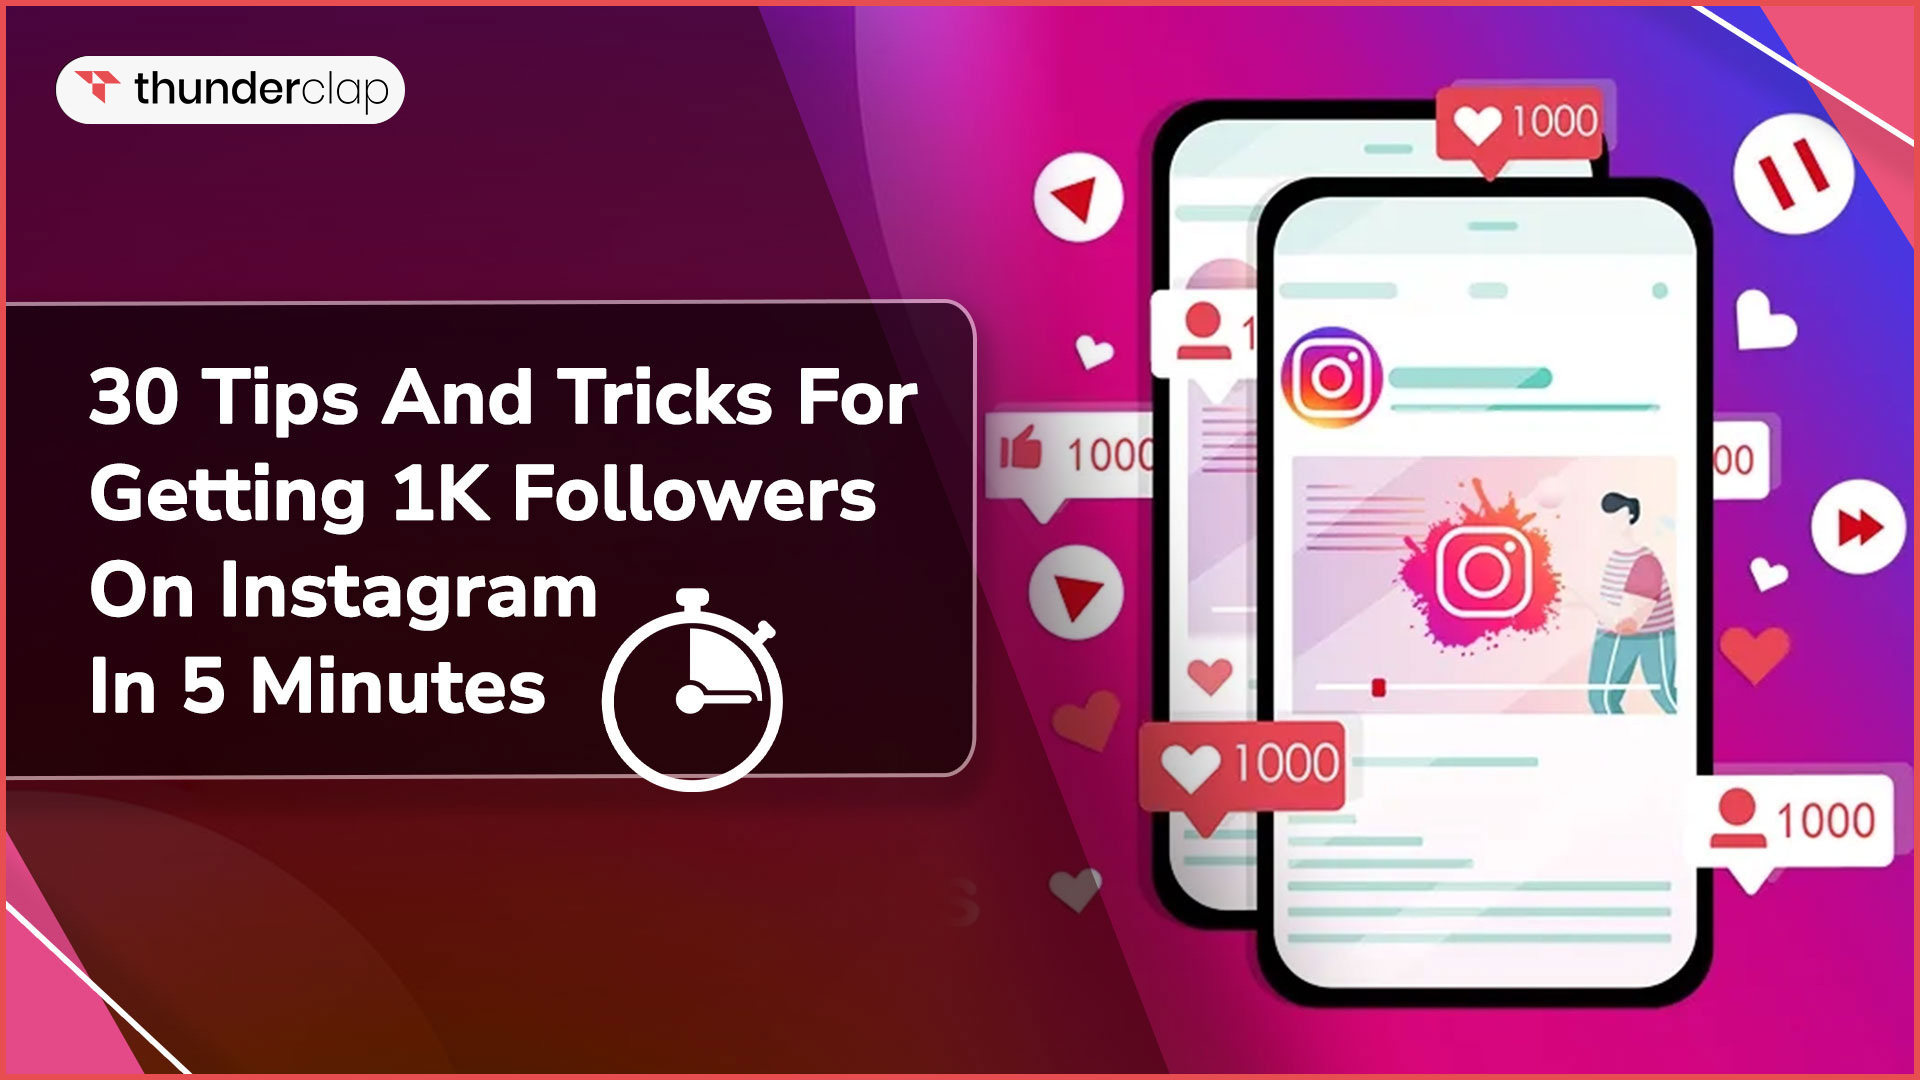 30 Tips And Tricks For Getting 1K Followers on Instagram In 5 Minutes